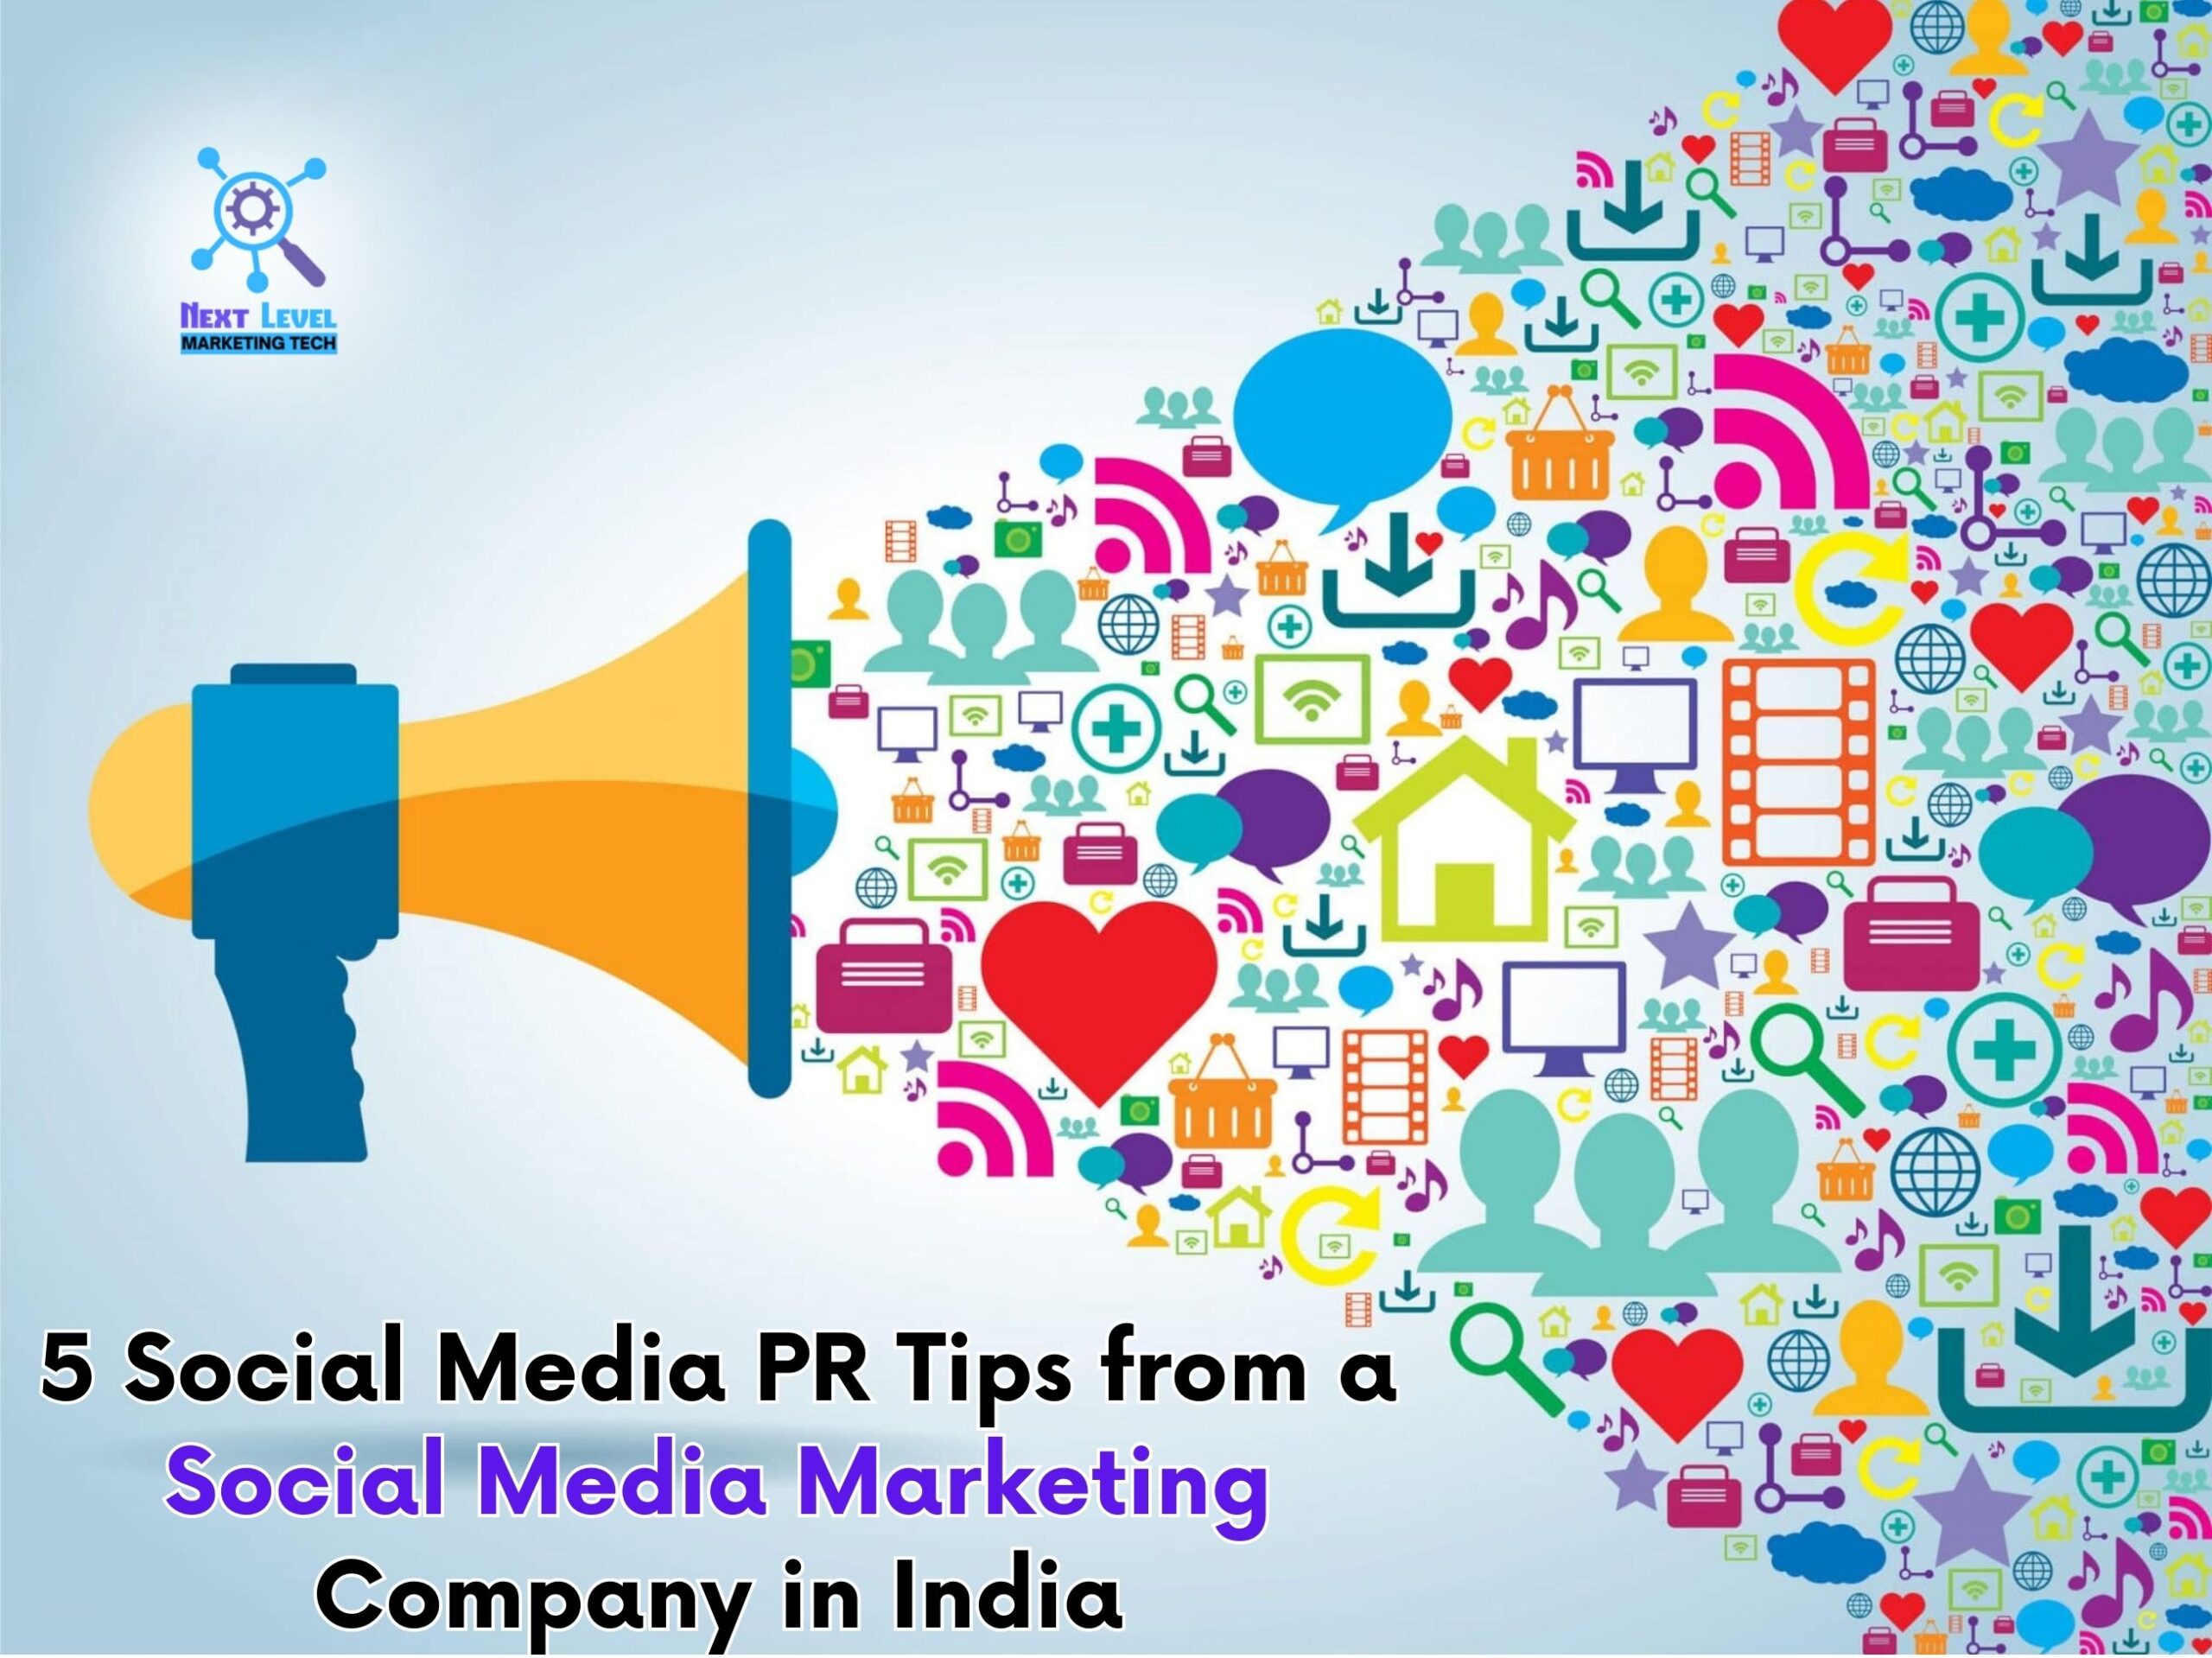 5 PR Tips from an Indian Social Media Marketing Firm